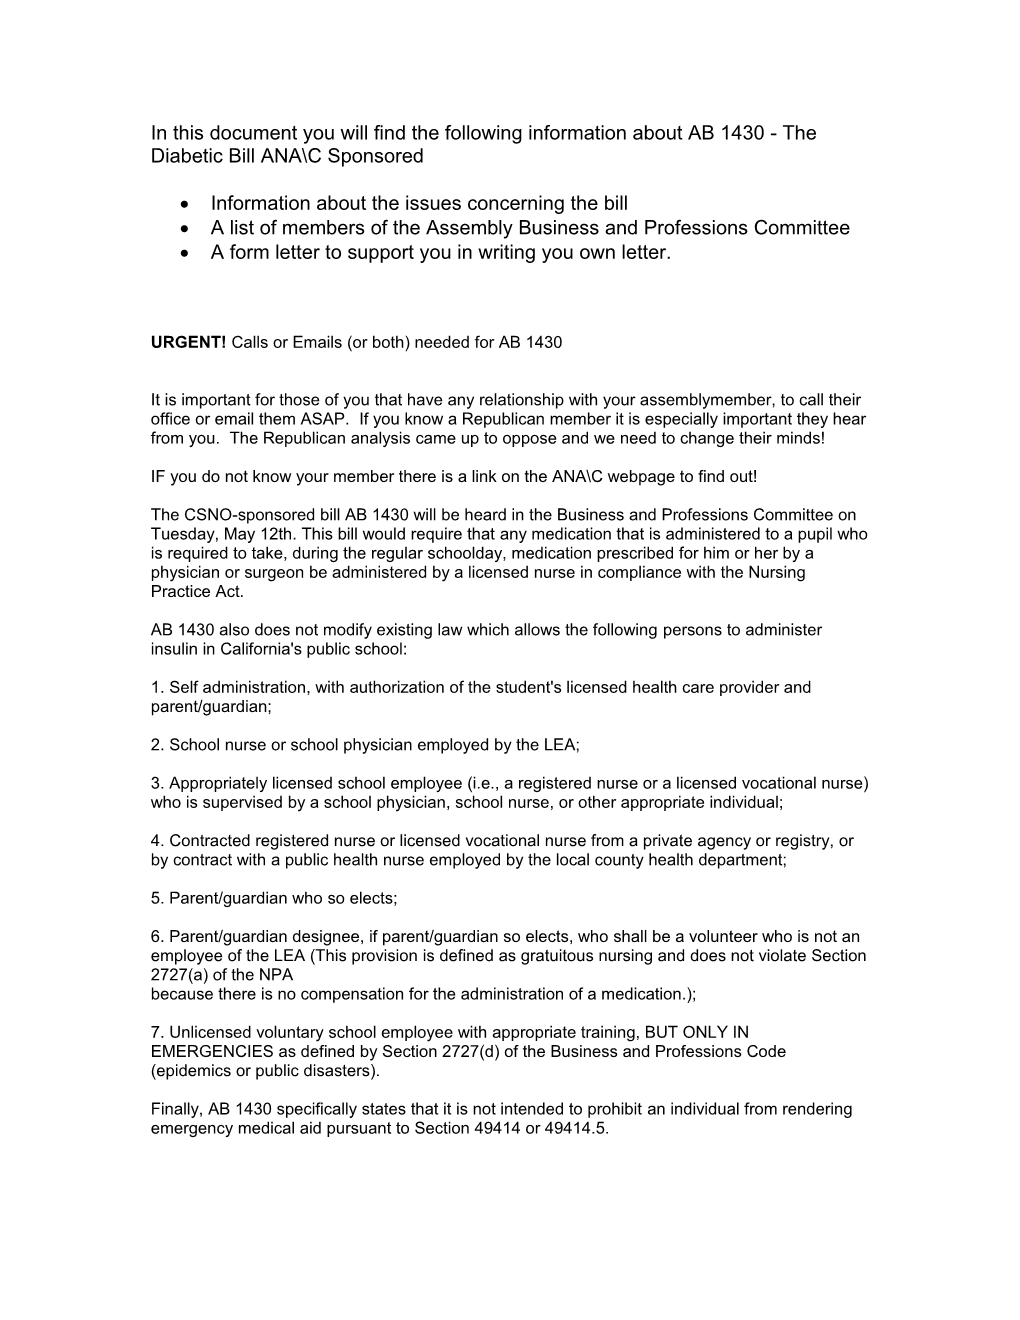 In This Document You Will Find the Following Information About AB 1430 - the Diabetic Bill